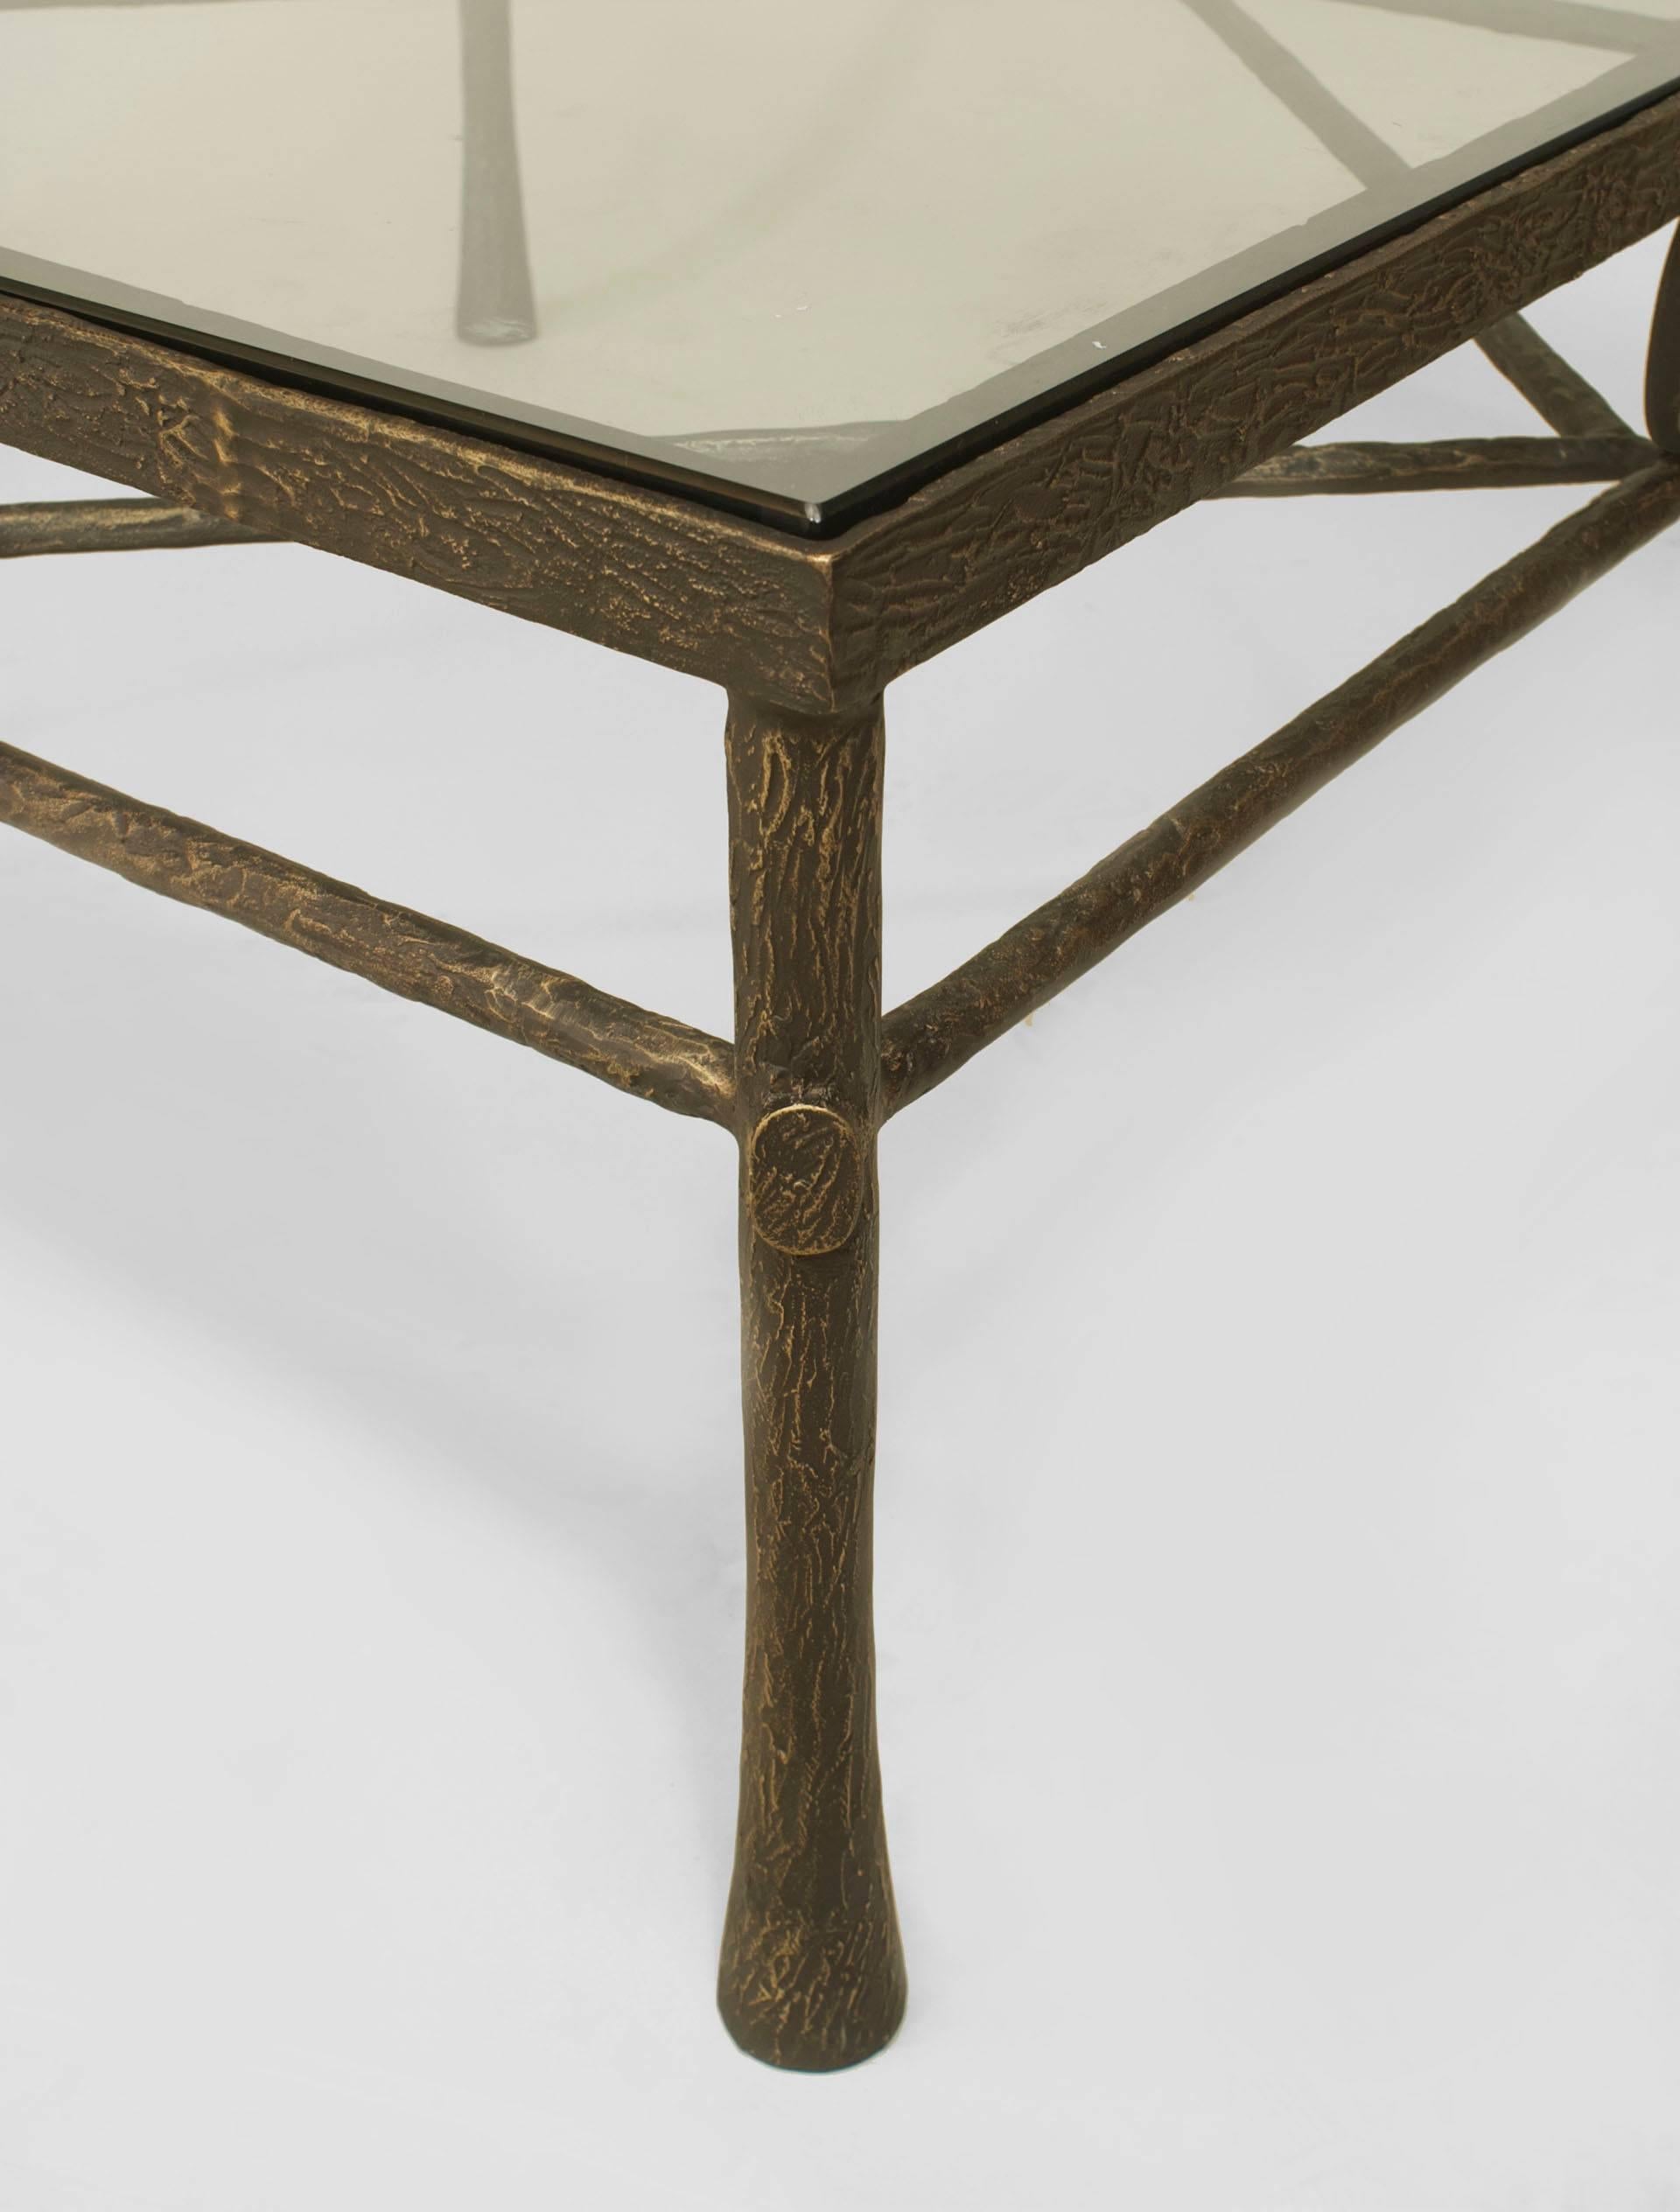 Postwar design (Giacometti style) textured dark bronze patina square coffee table with stretcher having a centred medallion and inset glass top (Carol Gratale Design).

  